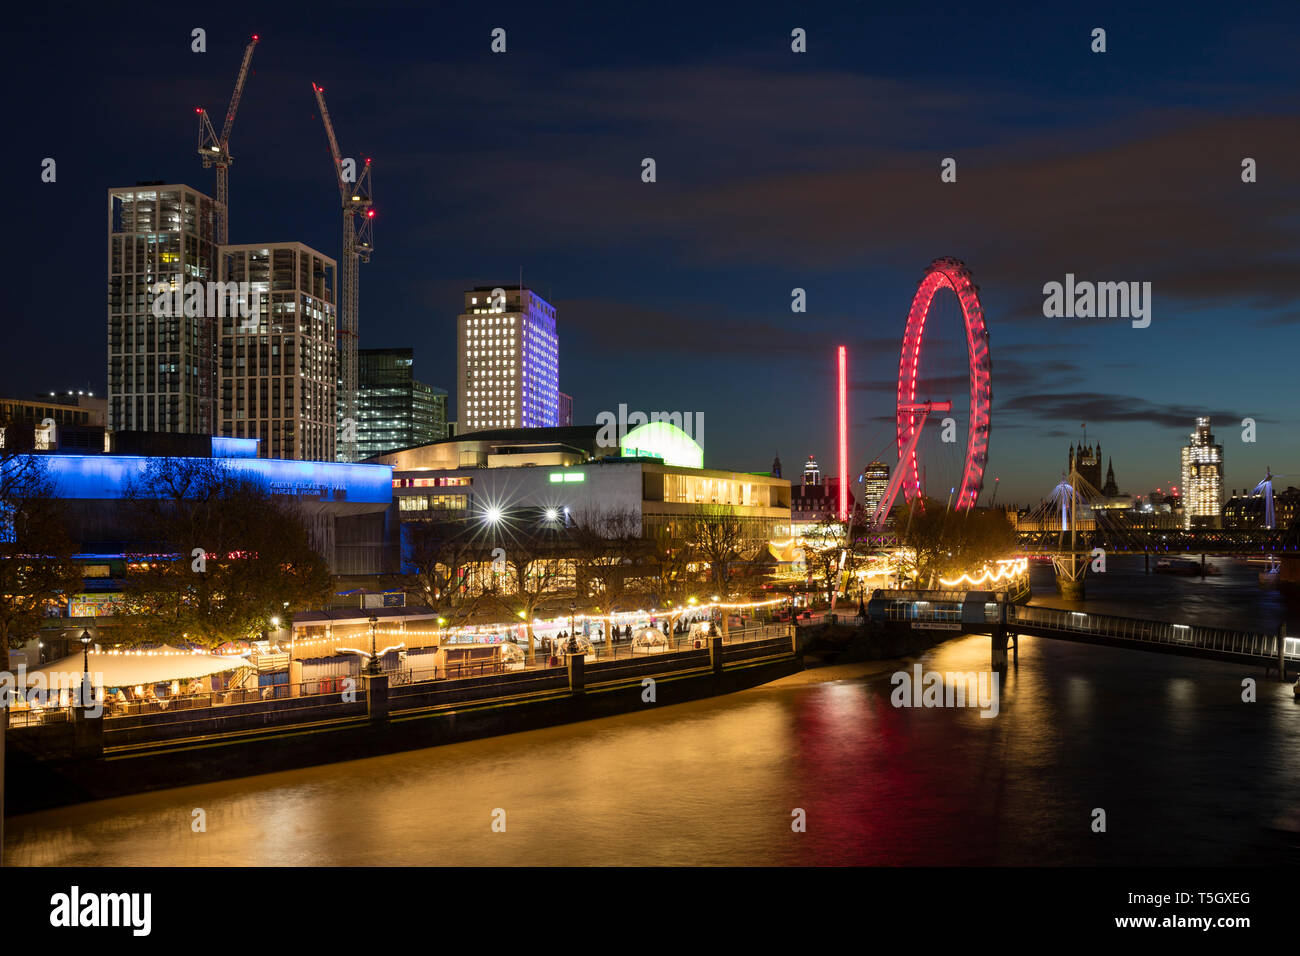 United Kingdom, England, London, Queen Elizabeth Hall, Royal Festival Hall and London Eye at River Thames at night Stock Photo